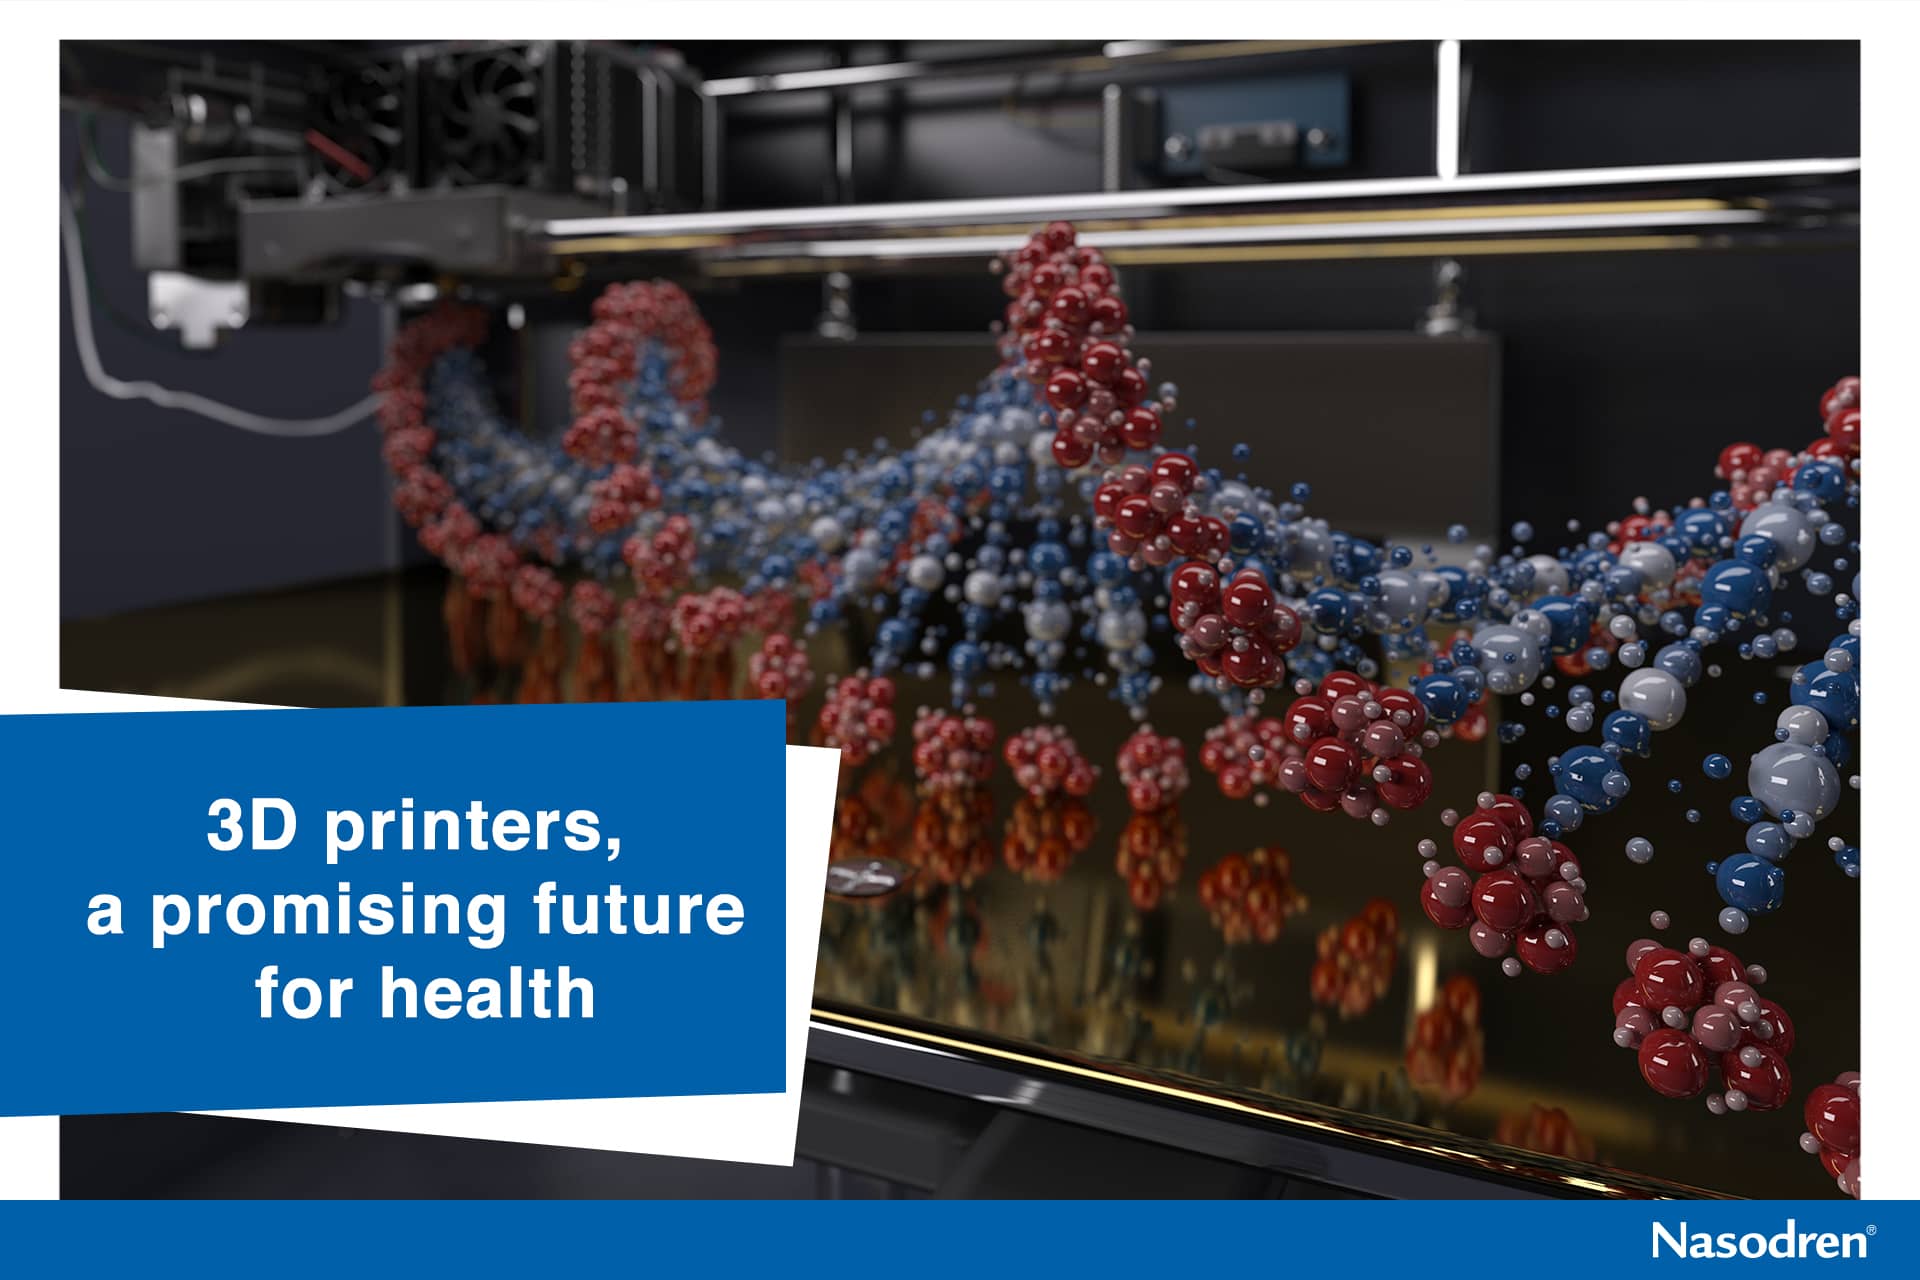 3D printers, a promising future for health